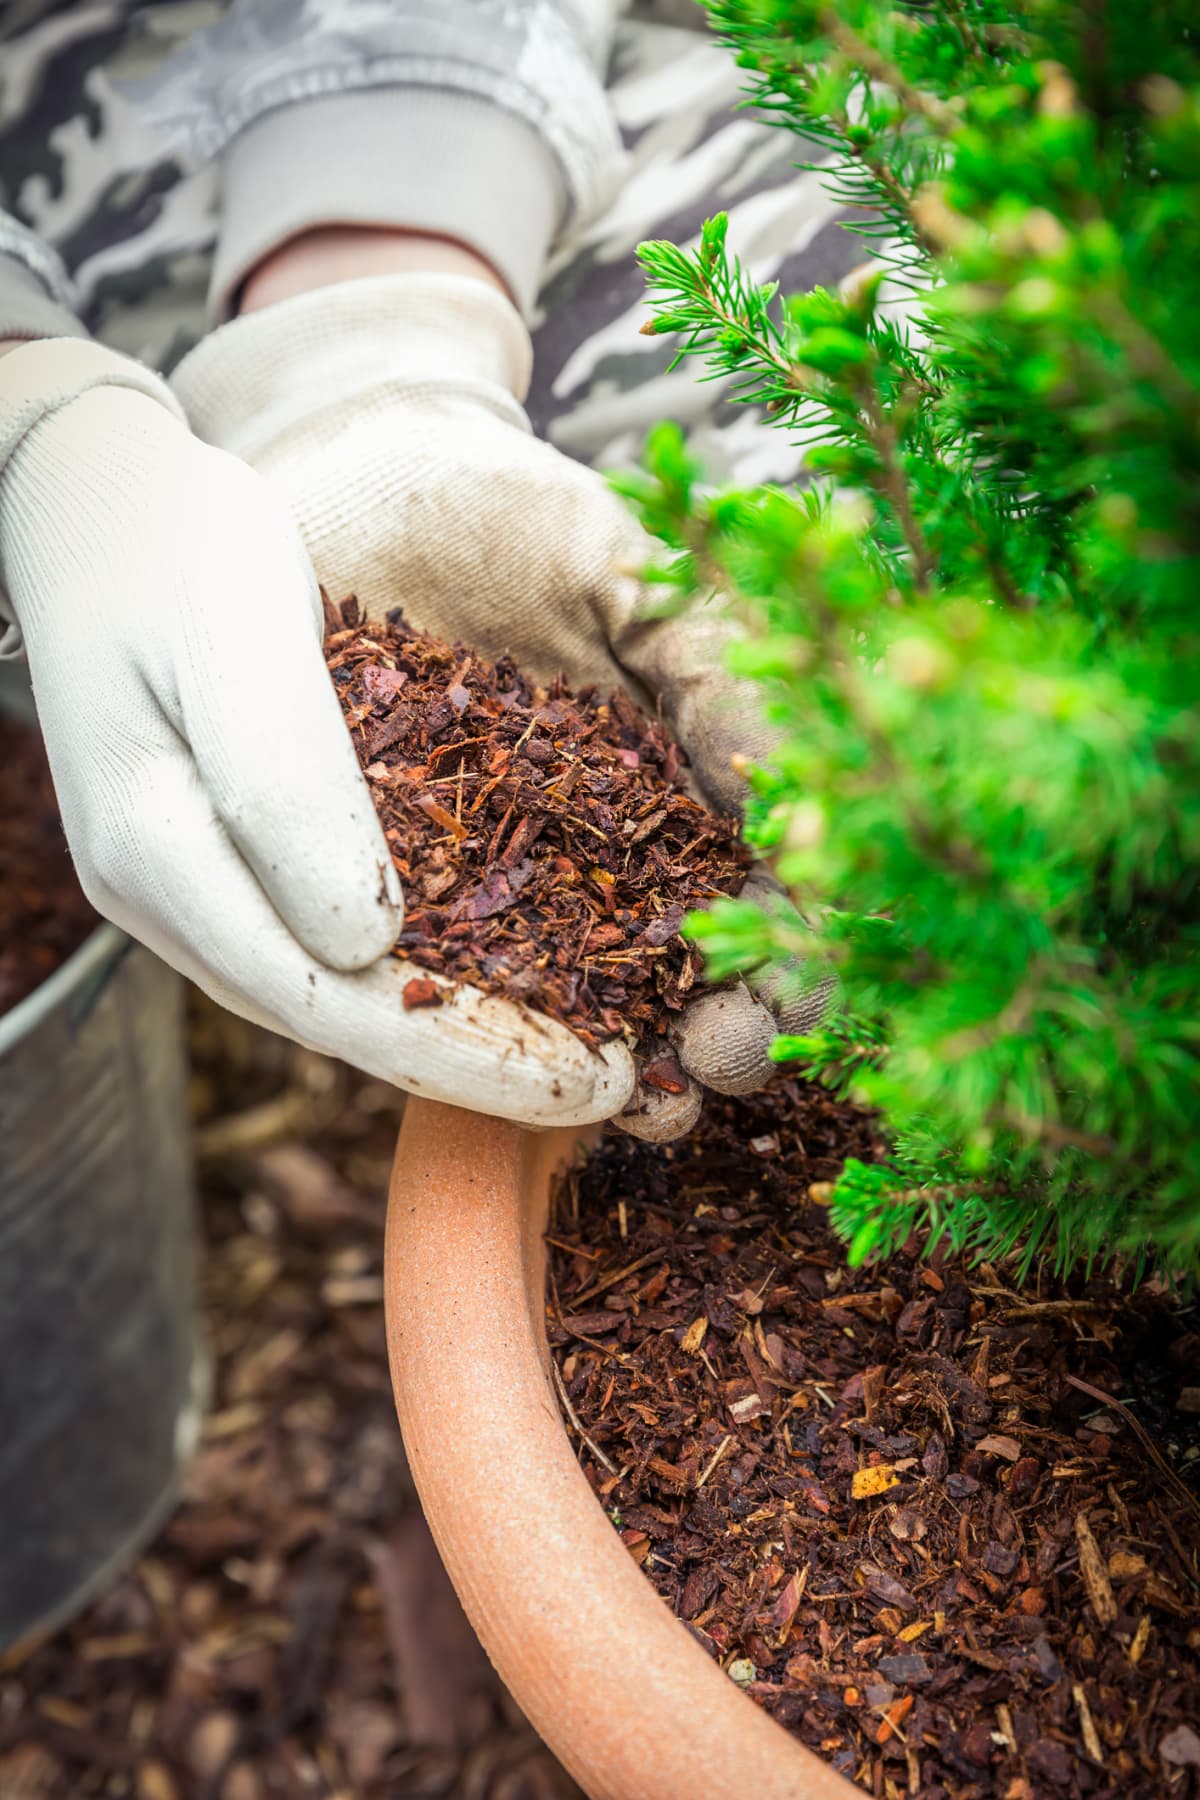 A gardener adding dried lawn clippings to a potted plant